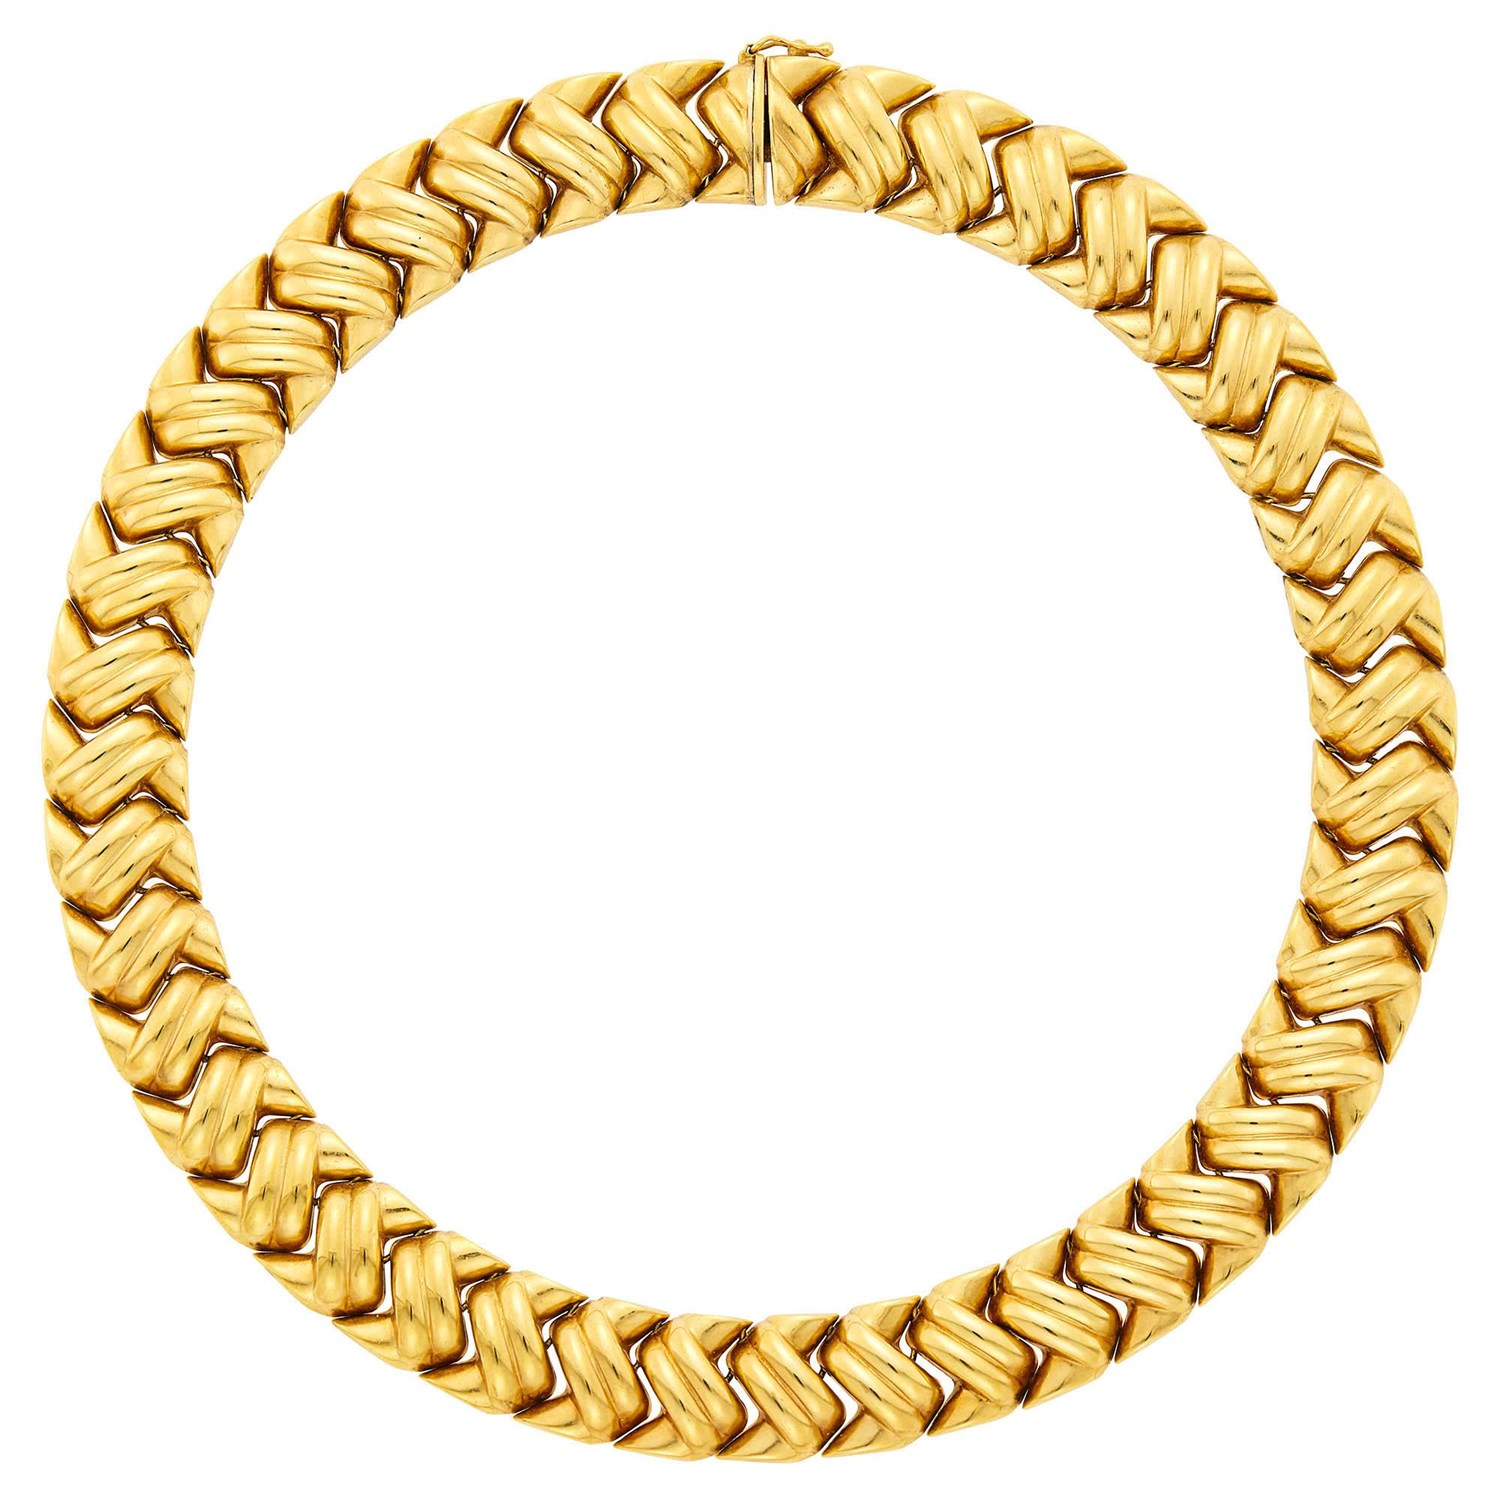 Lot 5 - Gold Necklace